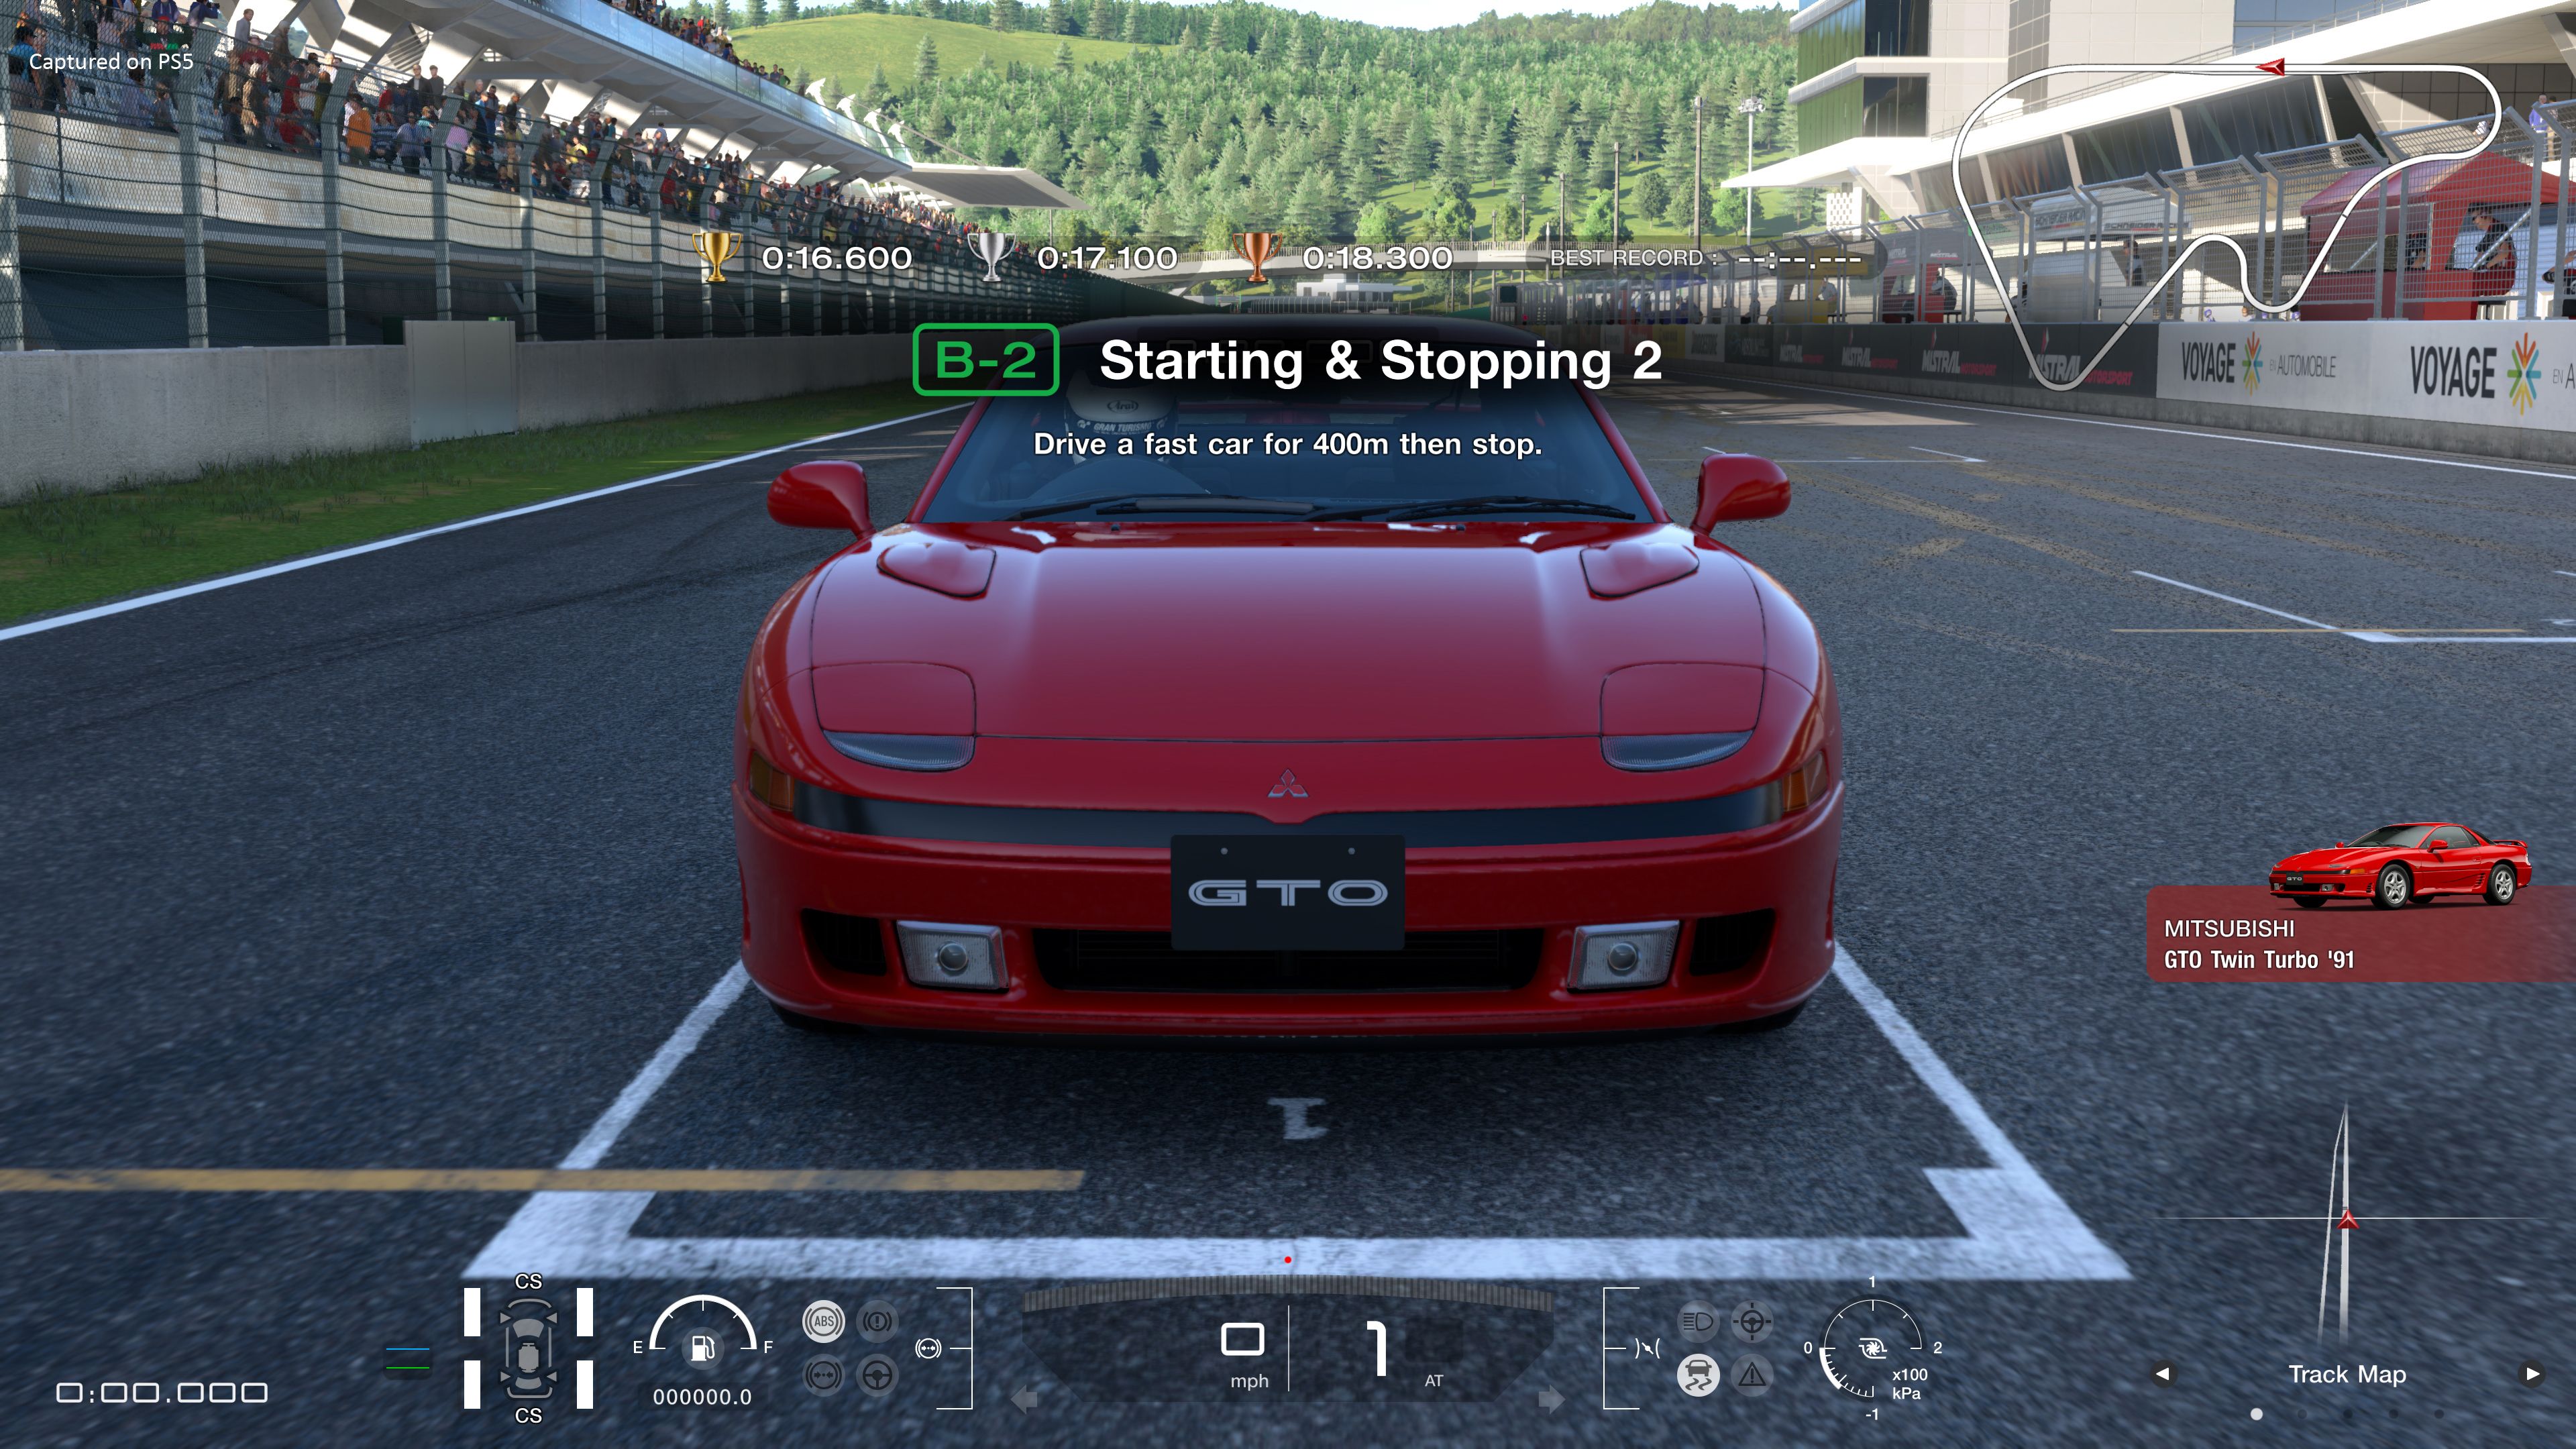 Acura Video Game - New Acura Driving Game: Beat That